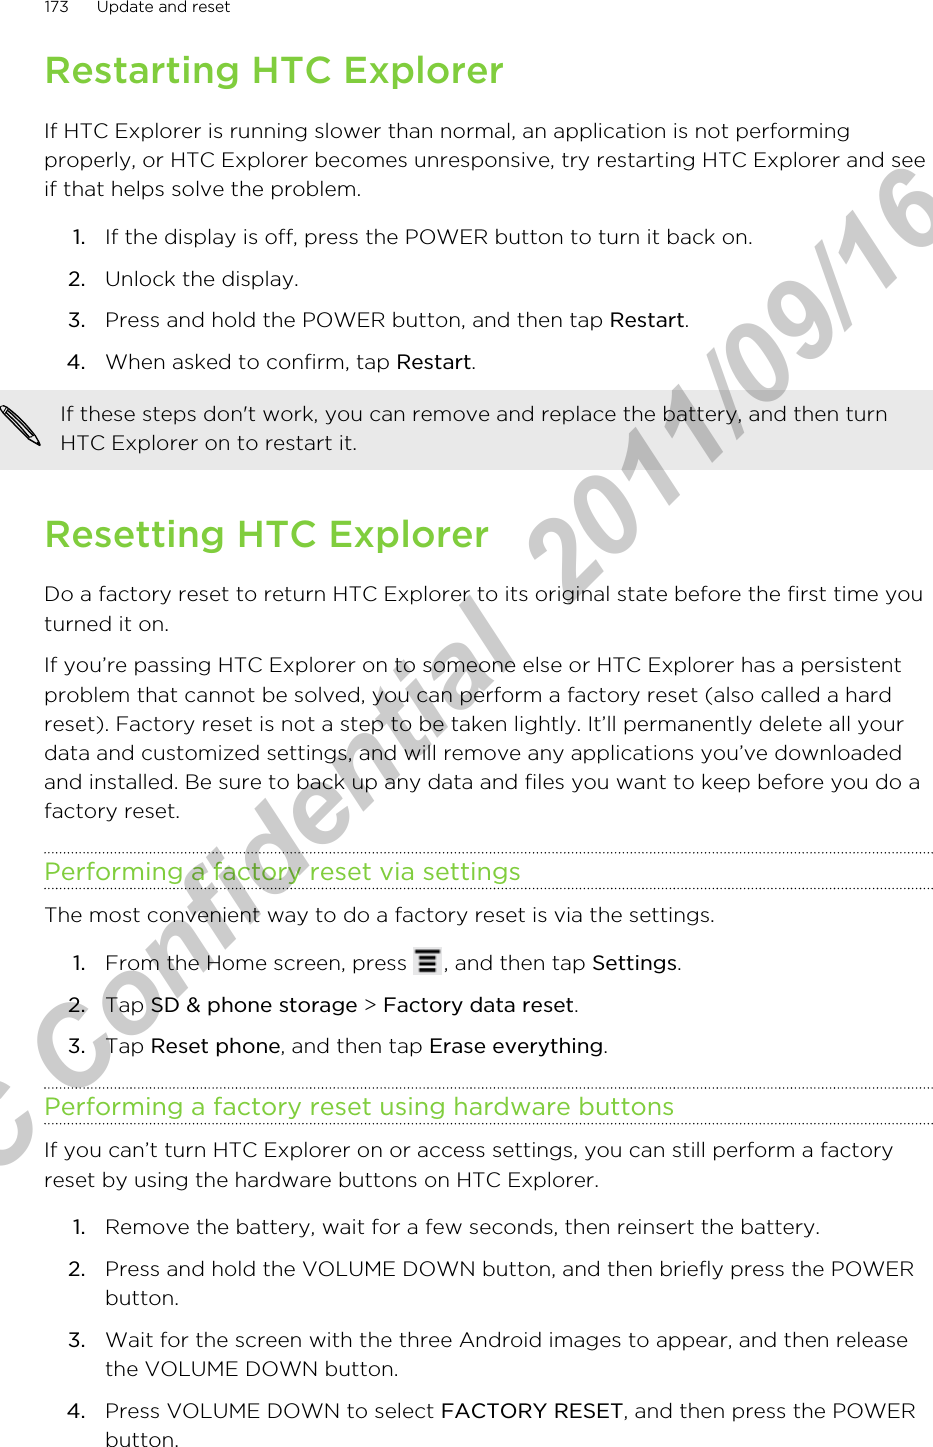 Restarting HTC ExplorerIf HTC Explorer is running slower than normal, an application is not performingproperly, or HTC Explorer becomes unresponsive, try restarting HTC Explorer and seeif that helps solve the problem.1. If the display is off, press the POWER button to turn it back on.2. Unlock the display.3. Press and hold the POWER button, and then tap Restart.4. When asked to confirm, tap Restart. If these steps don&apos;t work, you can remove and replace the battery, and then turnHTC Explorer on to restart it.Resetting HTC ExplorerDo a factory reset to return HTC Explorer to its original state before the first time youturned it on.If you’re passing HTC Explorer on to someone else or HTC Explorer has a persistentproblem that cannot be solved, you can perform a factory reset (also called a hardreset). Factory reset is not a step to be taken lightly. It’ll permanently delete all yourdata and customized settings, and will remove any applications you’ve downloadedand installed. Be sure to back up any data and files you want to keep before you do afactory reset.Performing a factory reset via settingsThe most convenient way to do a factory reset is via the settings.1. From the Home screen, press  , and then tap Settings.2. Tap SD &amp; phone storage &gt; Factory data reset.3. Tap Reset phone, and then tap Erase everything.Performing a factory reset using hardware buttonsIf you can’t turn HTC Explorer on or access settings, you can still perform a factoryreset by using the hardware buttons on HTC Explorer.1. Remove the battery, wait for a few seconds, then reinsert the battery.2. Press and hold the VOLUME DOWN button, and then briefly press the POWERbutton.3. Wait for the screen with the three Android images to appear, and then releasethe VOLUME DOWN button.4. Press VOLUME DOWN to select FACTORY RESET, and then press the POWERbutton.173 Update and resetHTC Confidential  2011/09/16 